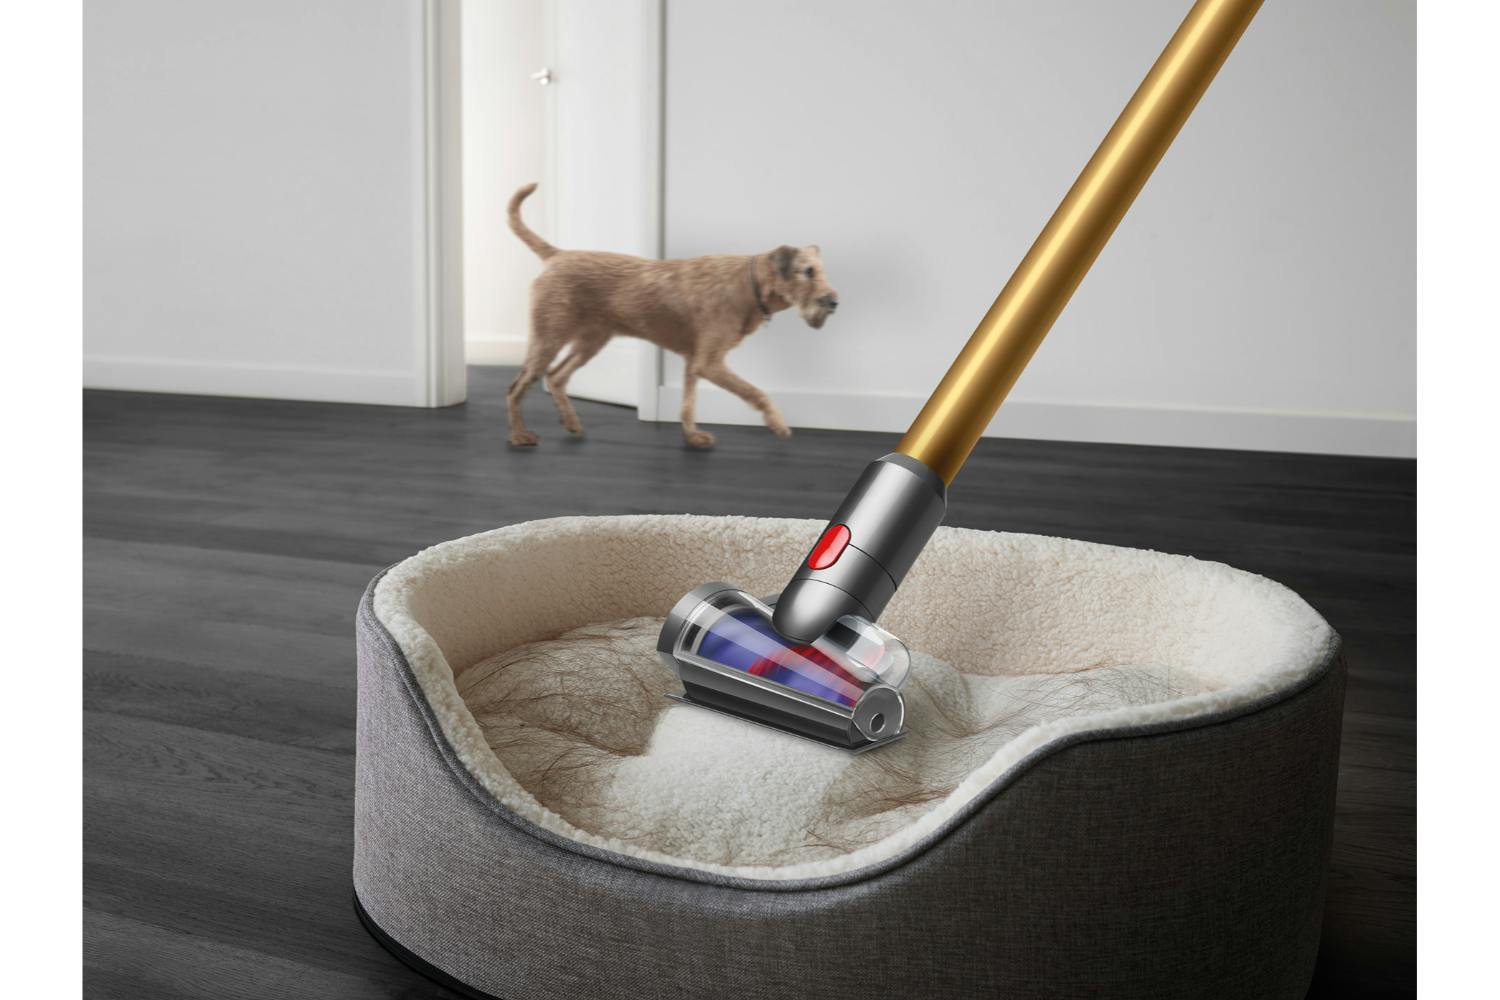 Dyson V12 Detect Slim Review - 6 Objective Tests 